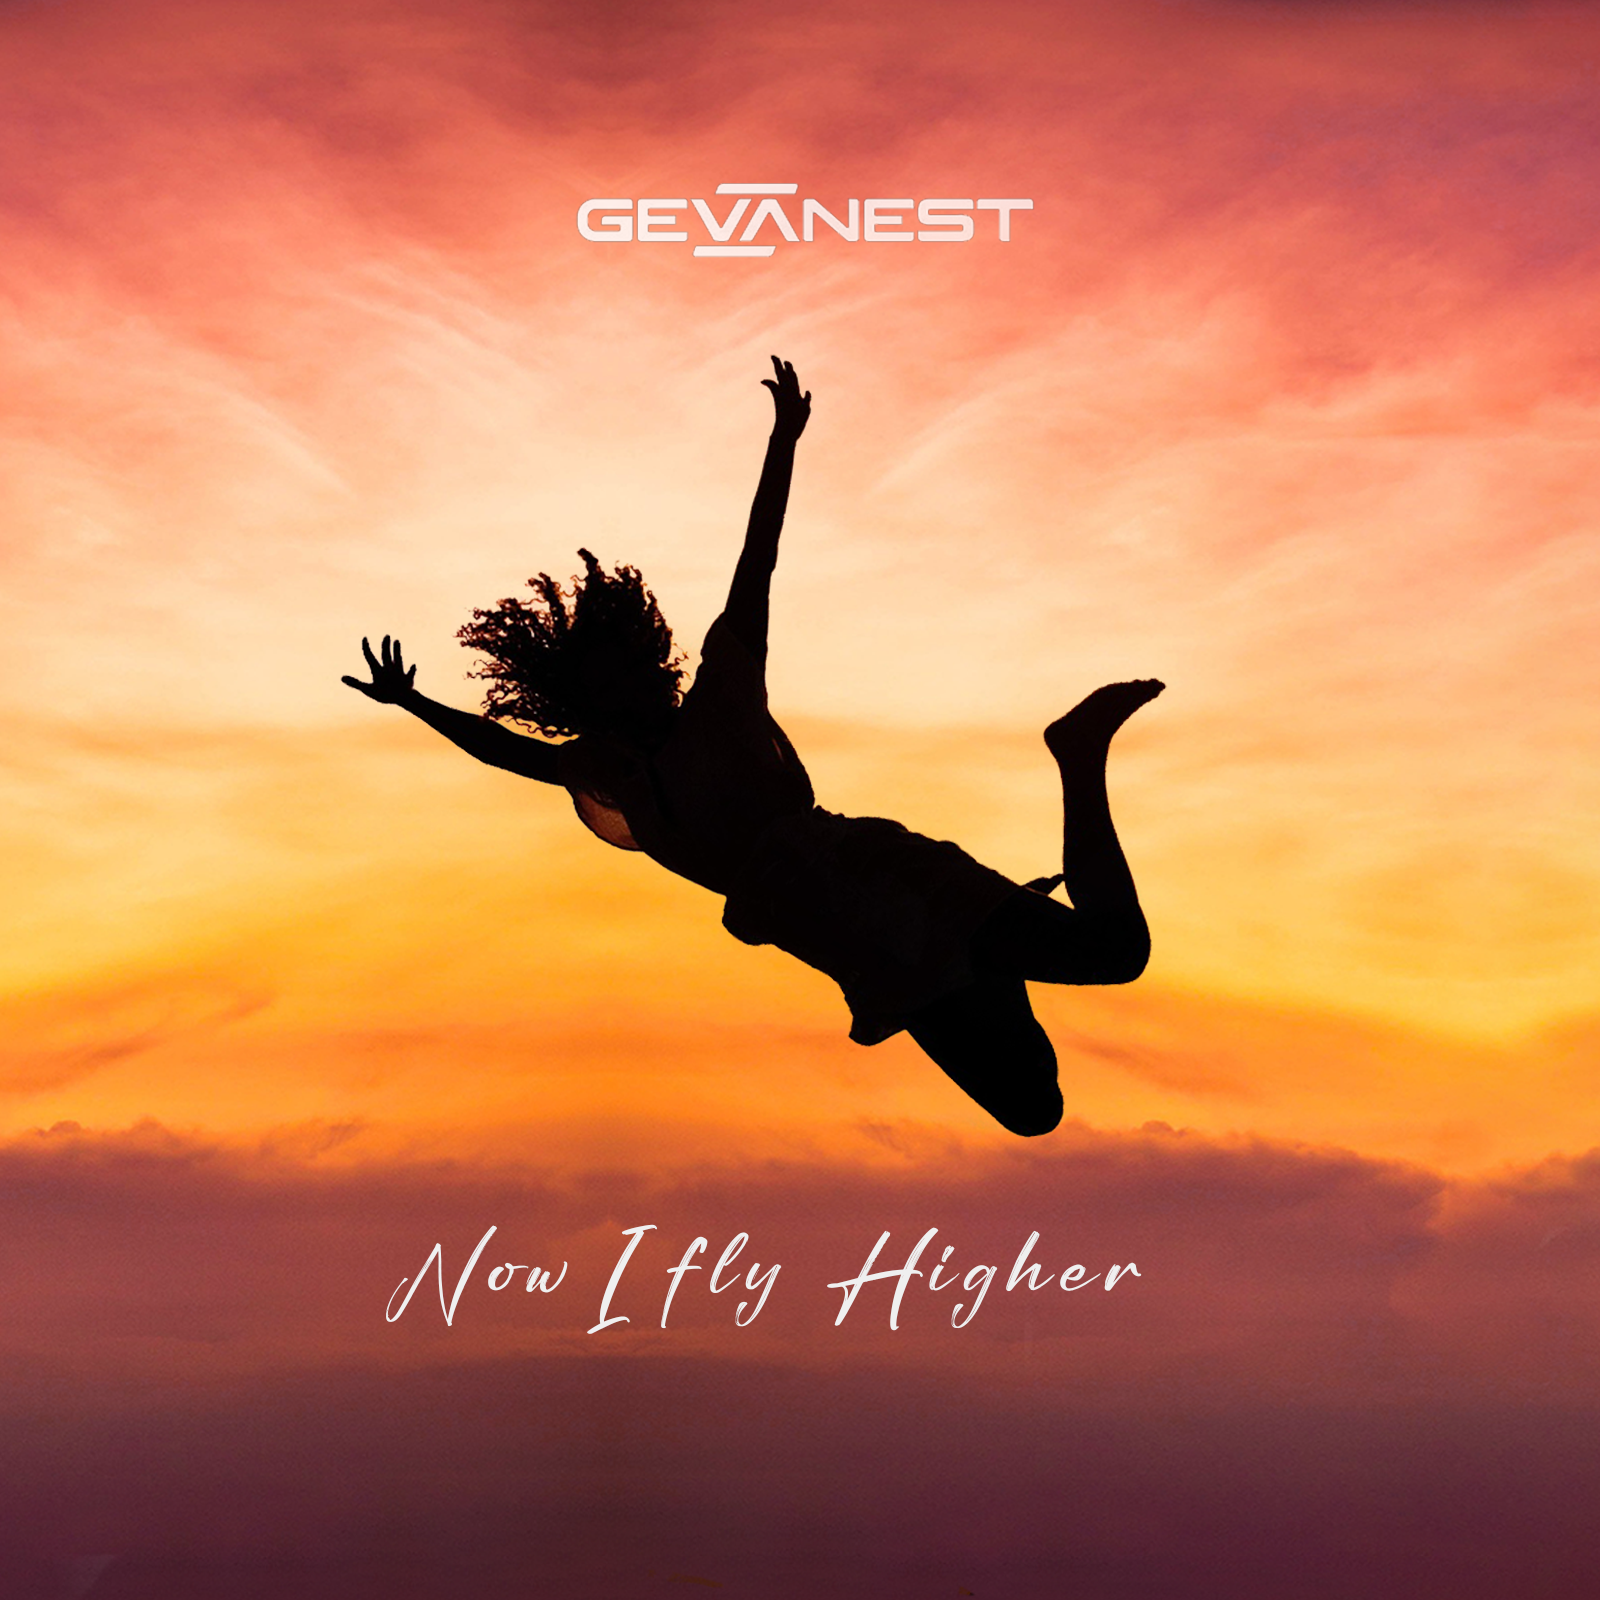 Musician, guitarist and DJ/Producer ‘Gevanest’ releases a sublime electronic anthem with new single ‘Now I fly Higher’.